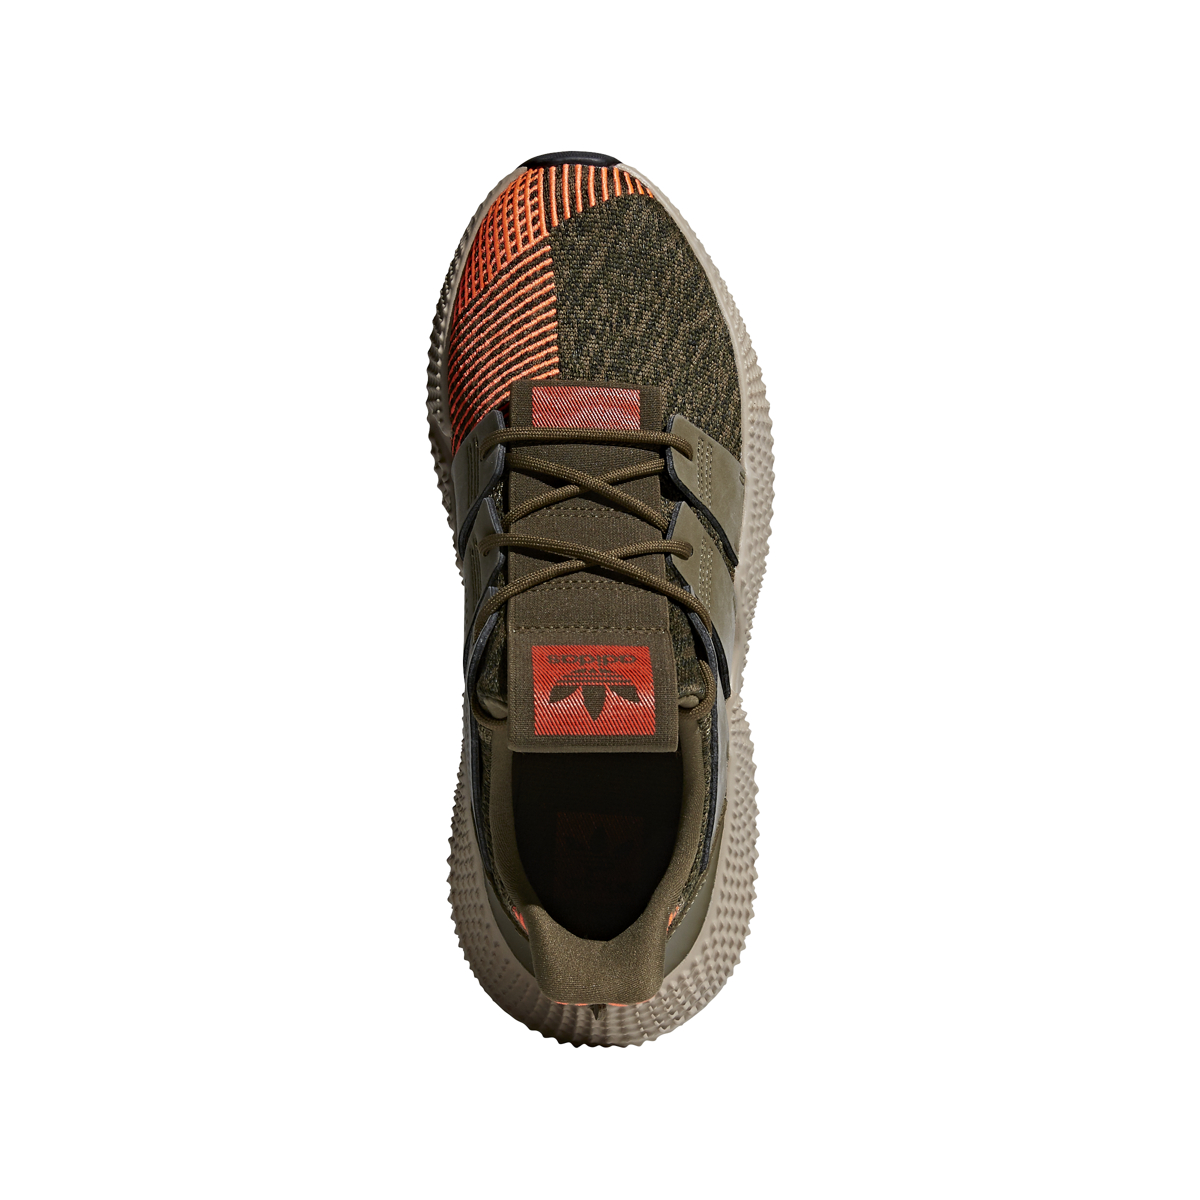 adidas prophere olive solar red